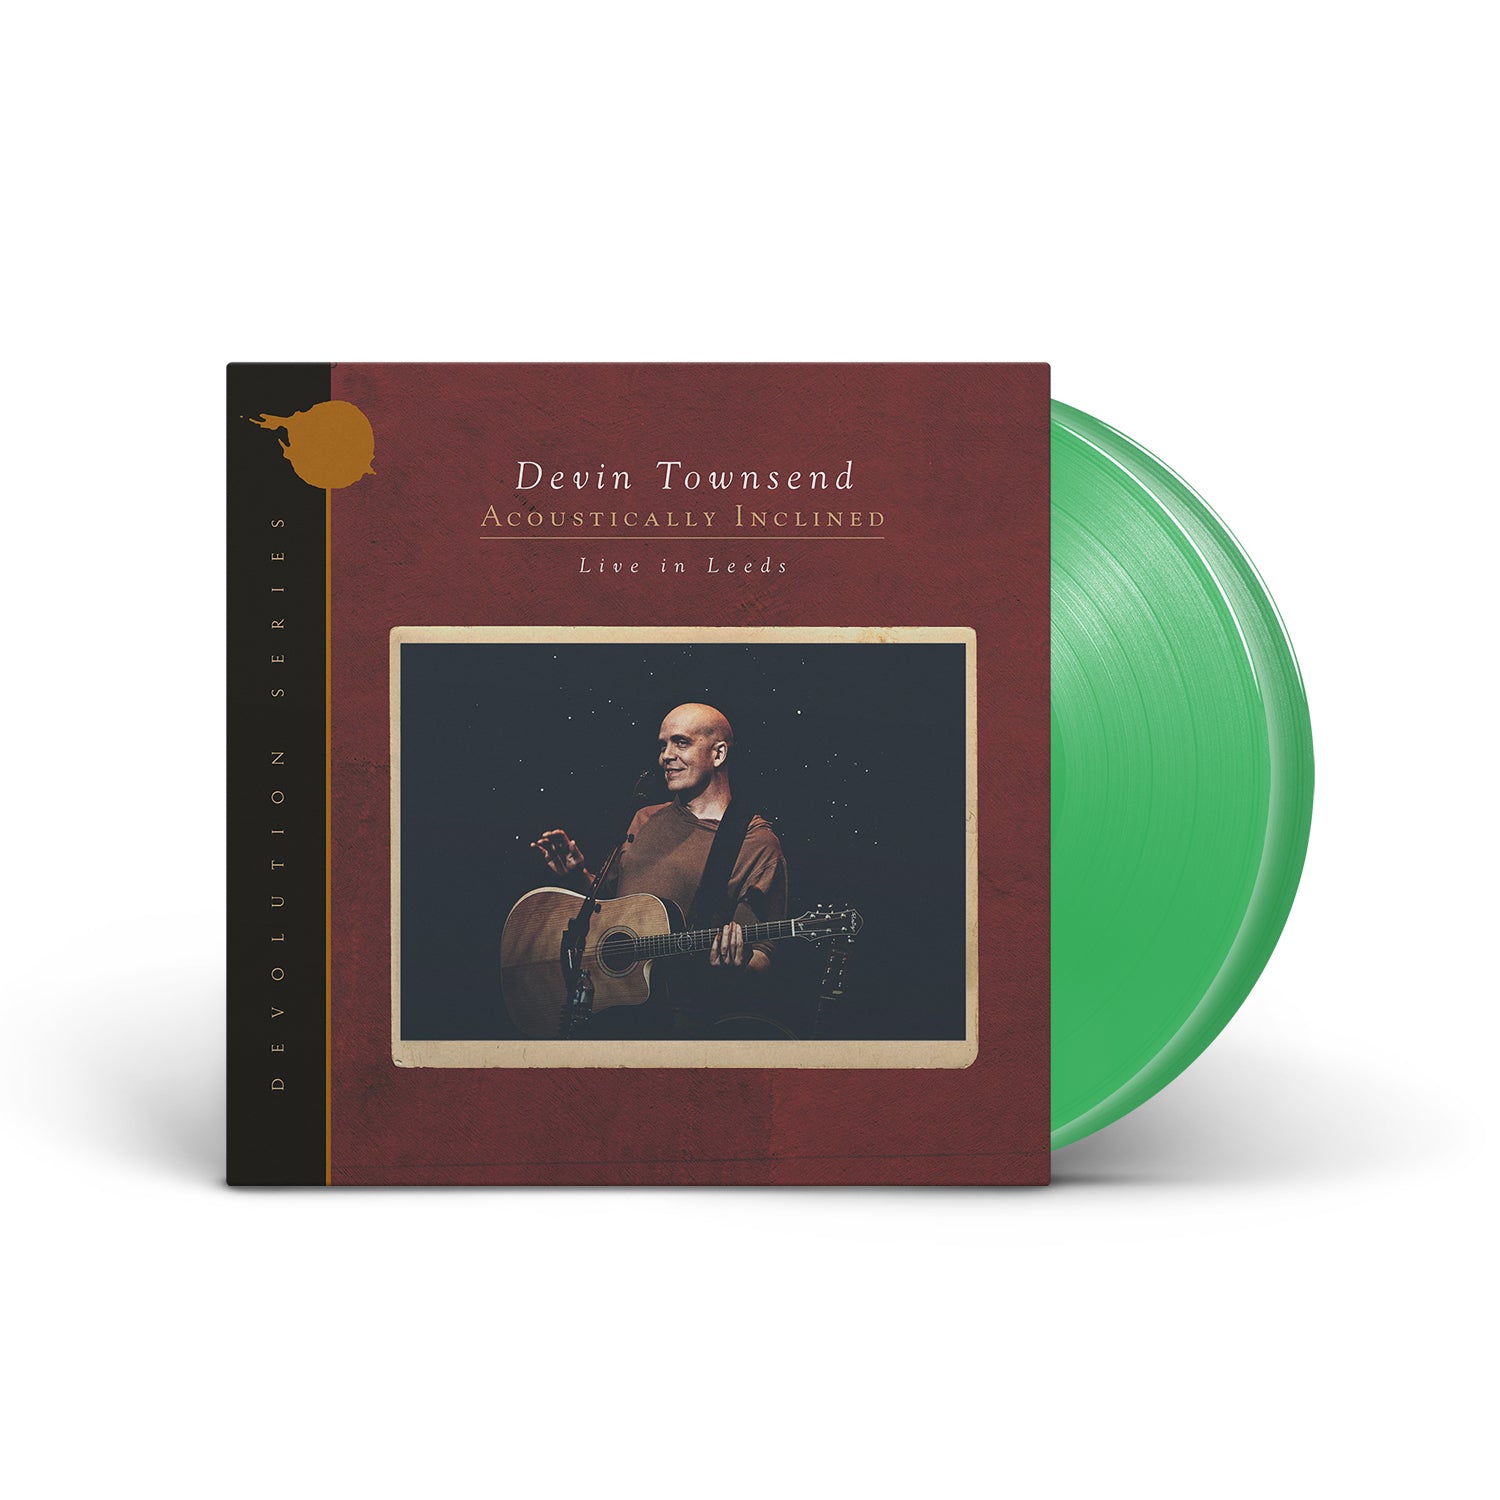 DEVIN TOWNSEND - Devolution Series #1 - Acoustically Inclined, Live in Leed - Green 2xLP